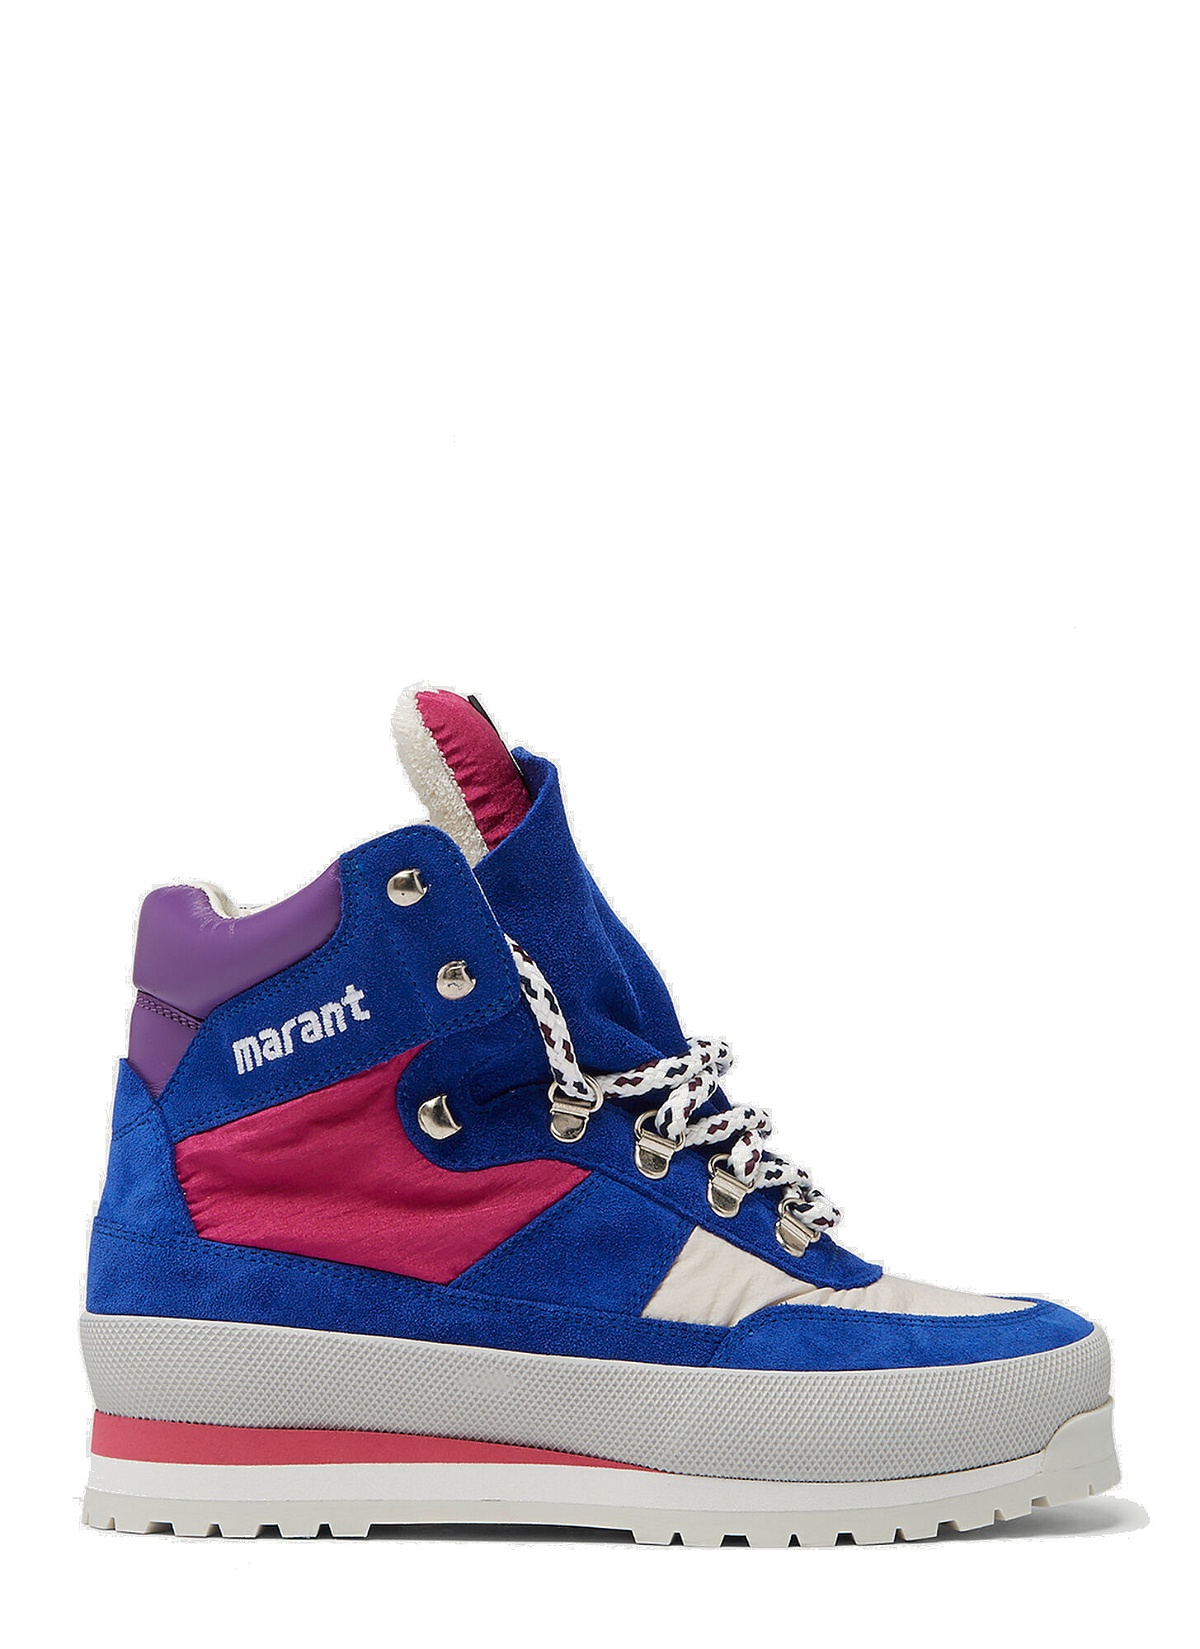 Bannry Wedge Sneakers in Blue Isabel Etoile